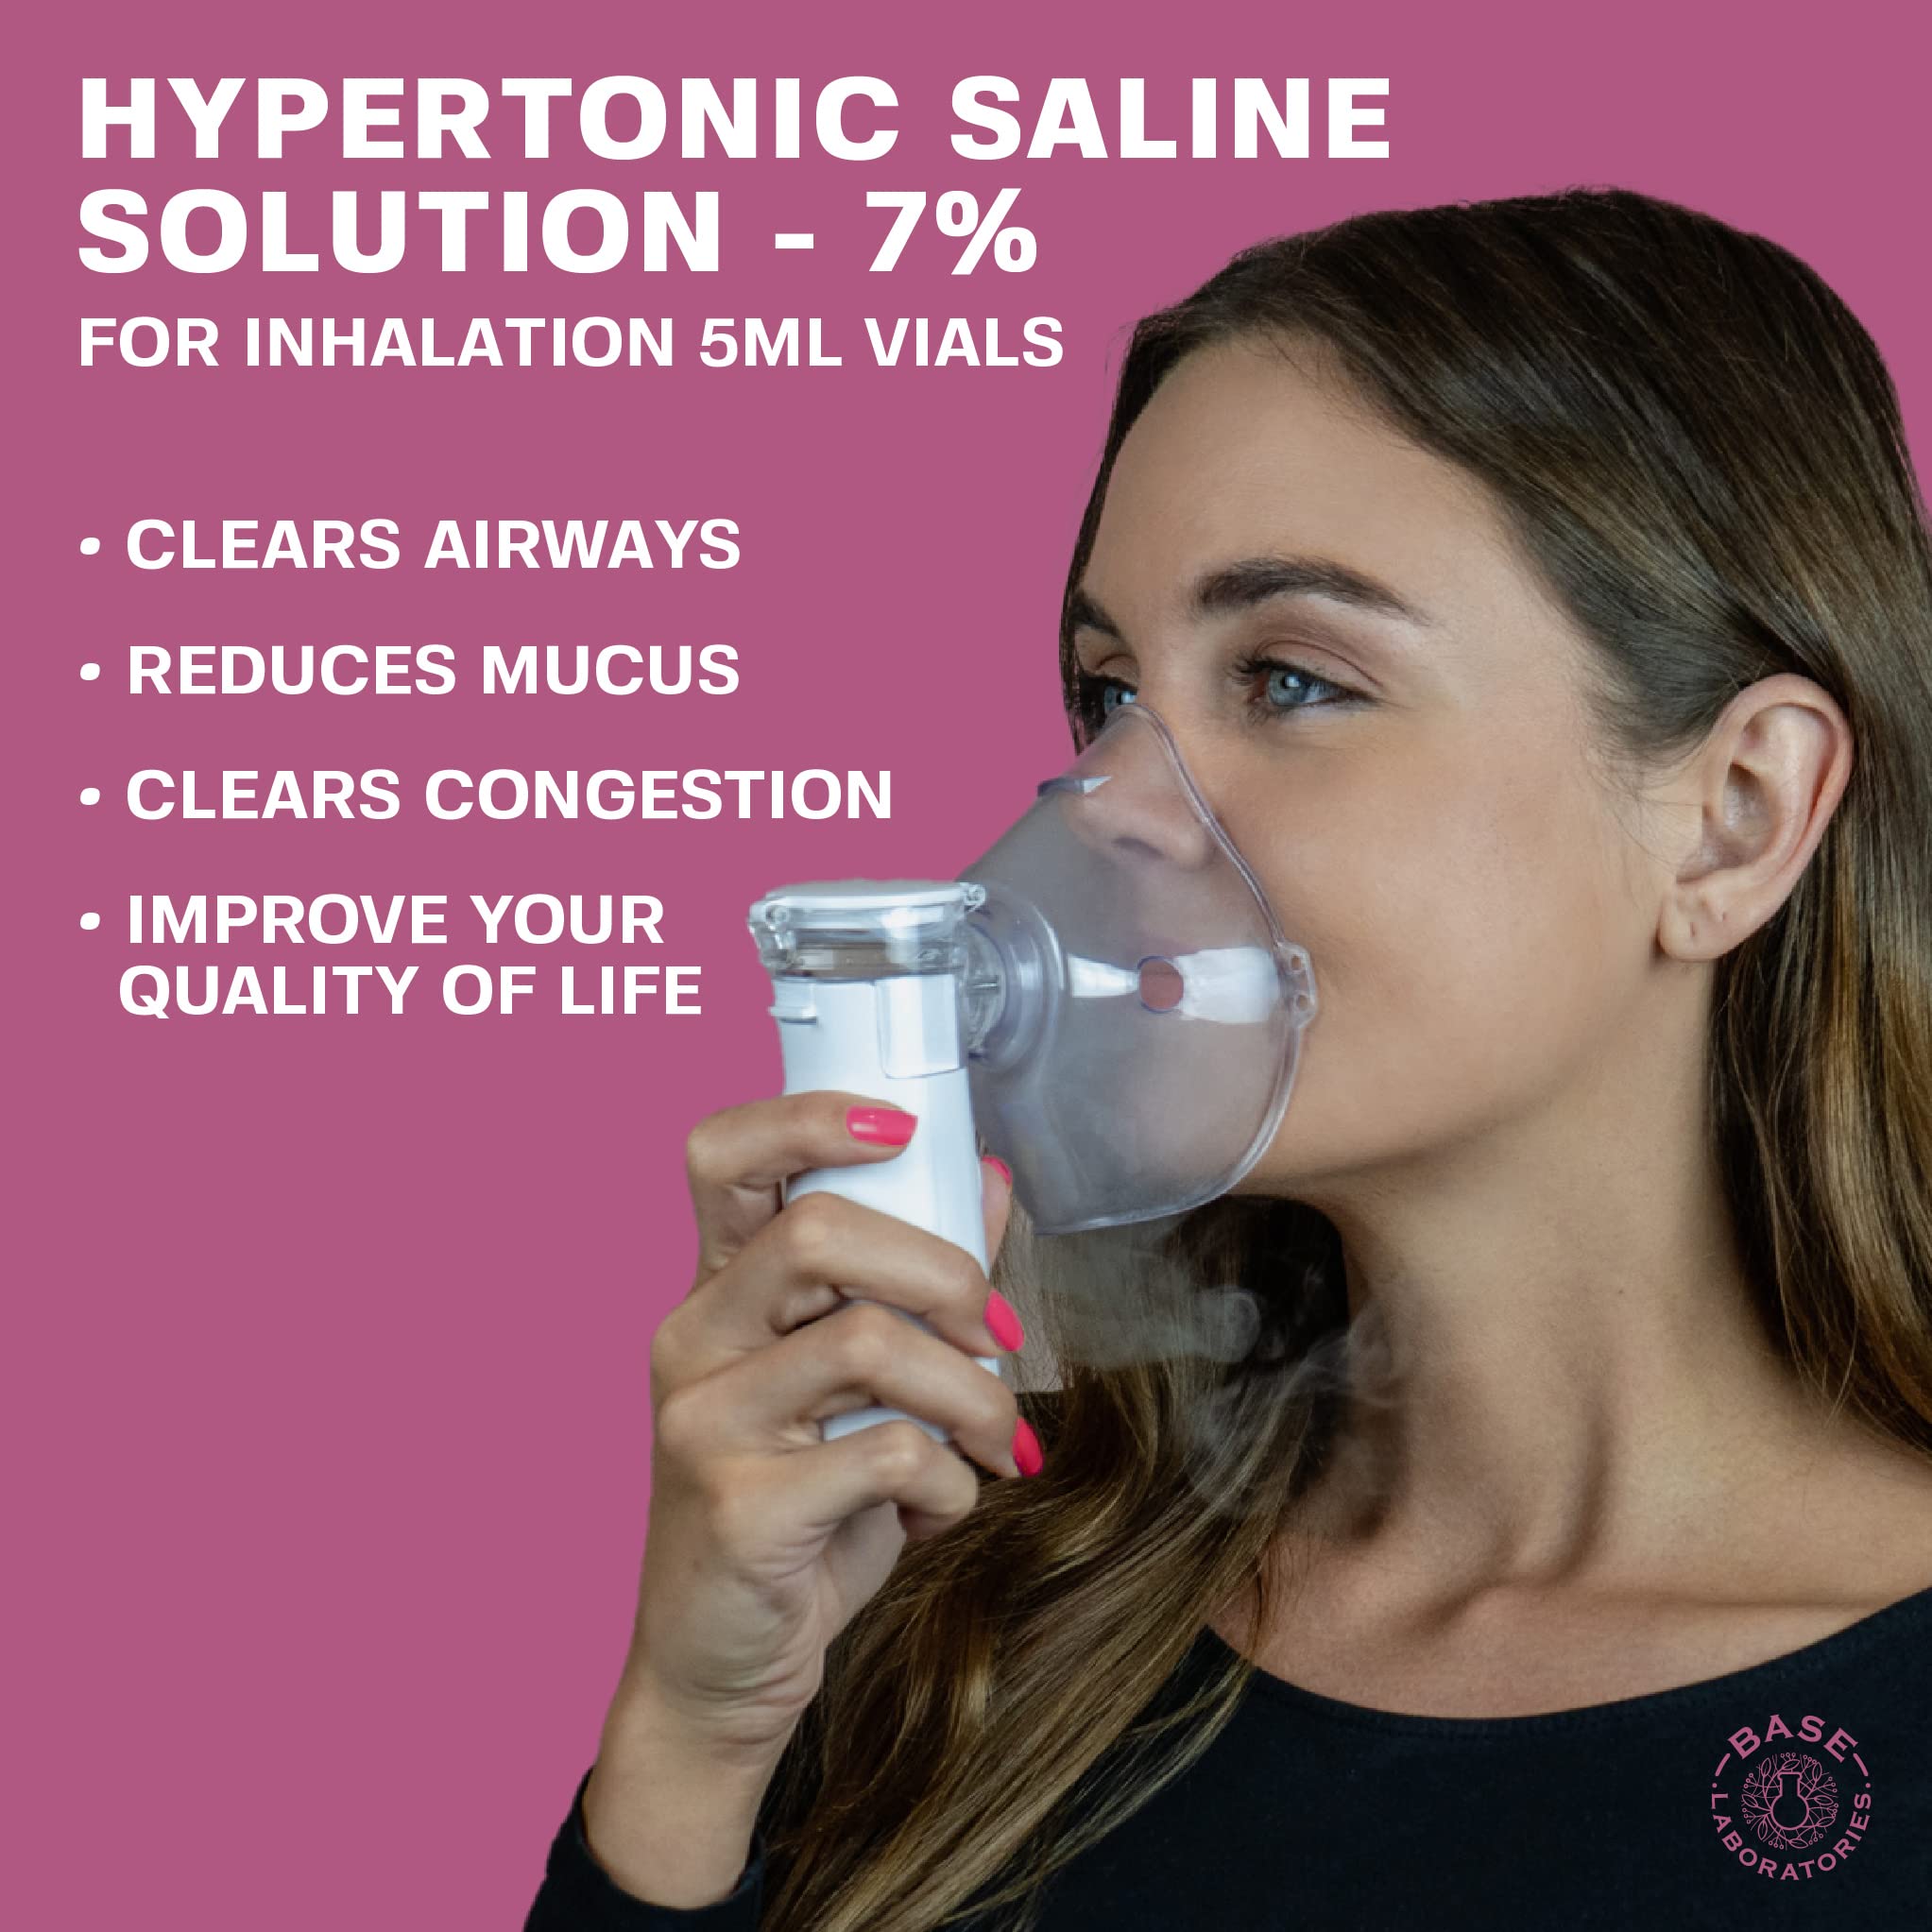 Base Labs 7% Hypertonic Saline Solution for Nebulizer Machine | Sterile Saline Solution for Inhalation| Helps with Respiratory Treatments, Clears Lungs, Mucus & Congestion l 25 Vials 5ml Unit Dose